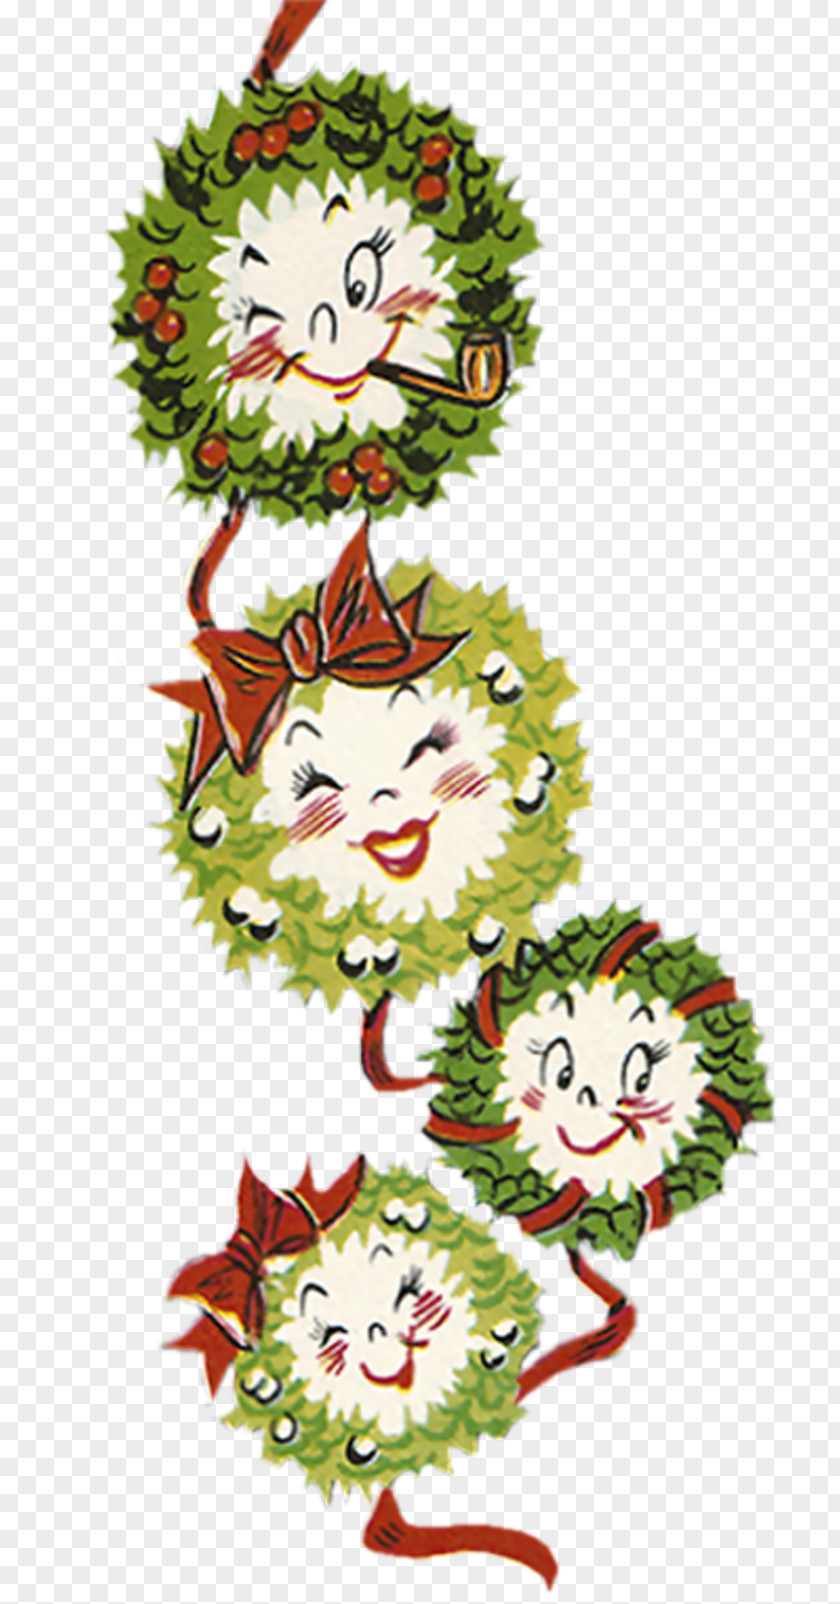 I Want You Christmas Tree Floral Design Ornament Clip Art PNG